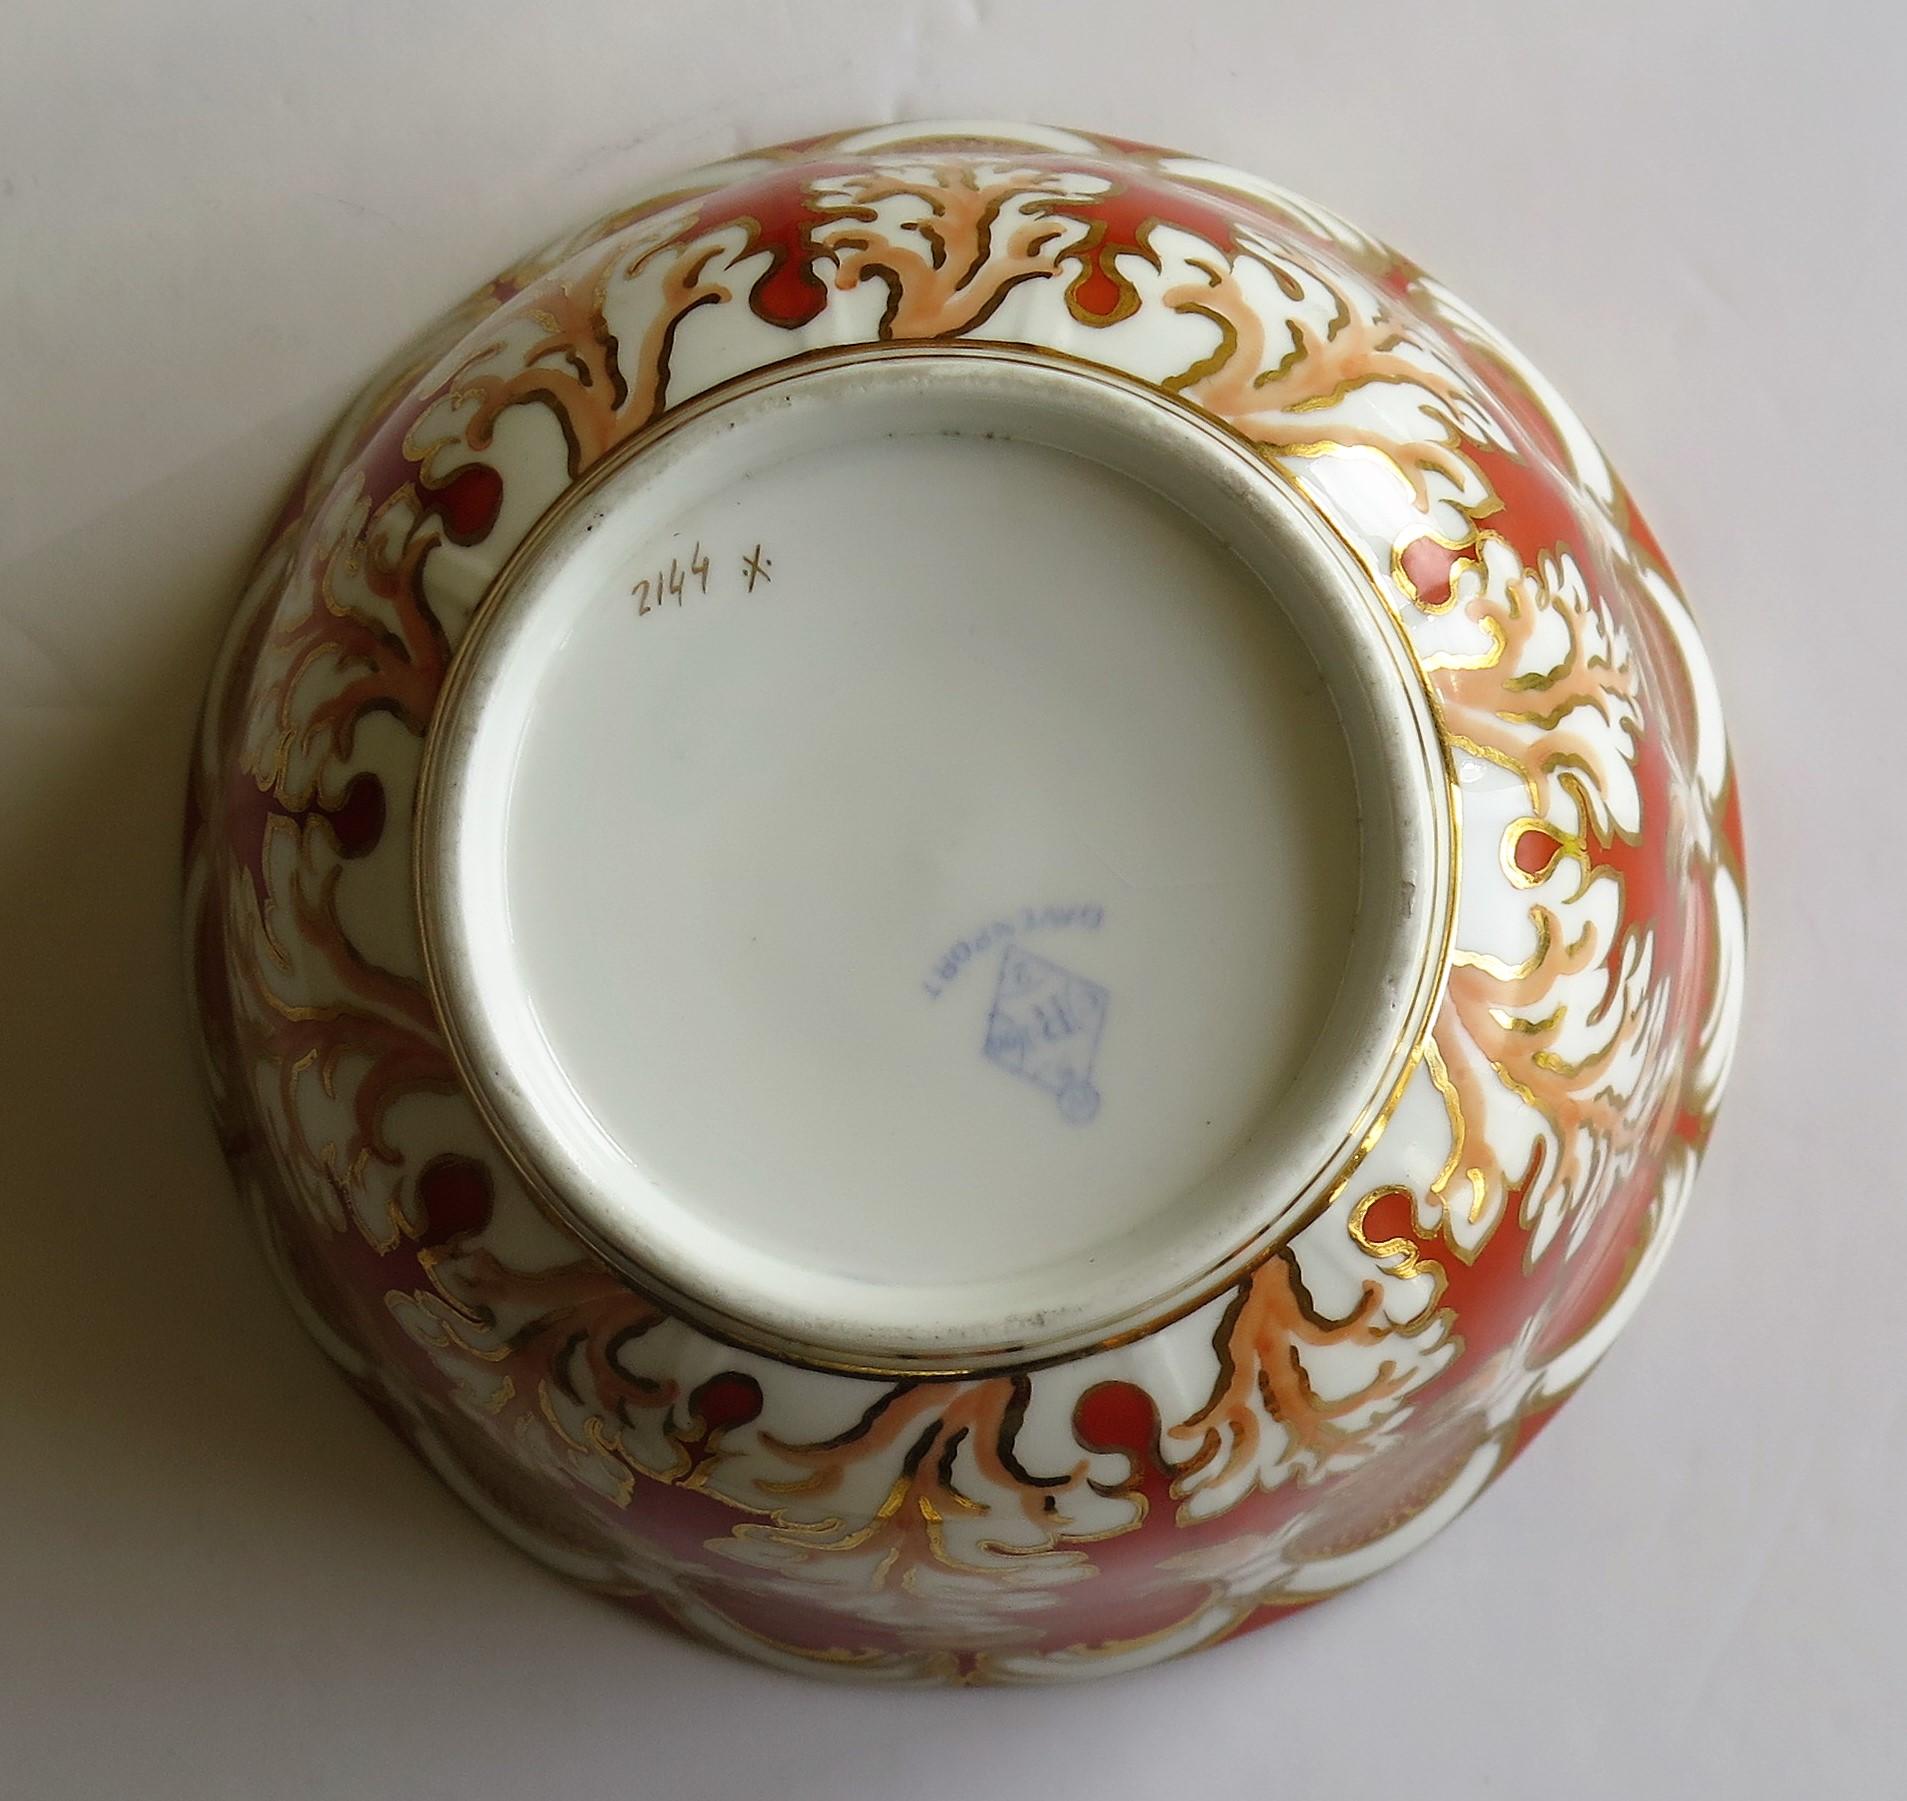 Davenport Porcelain Bowl in Pattern 2144 Fully Marked to Base, English, 1845 8